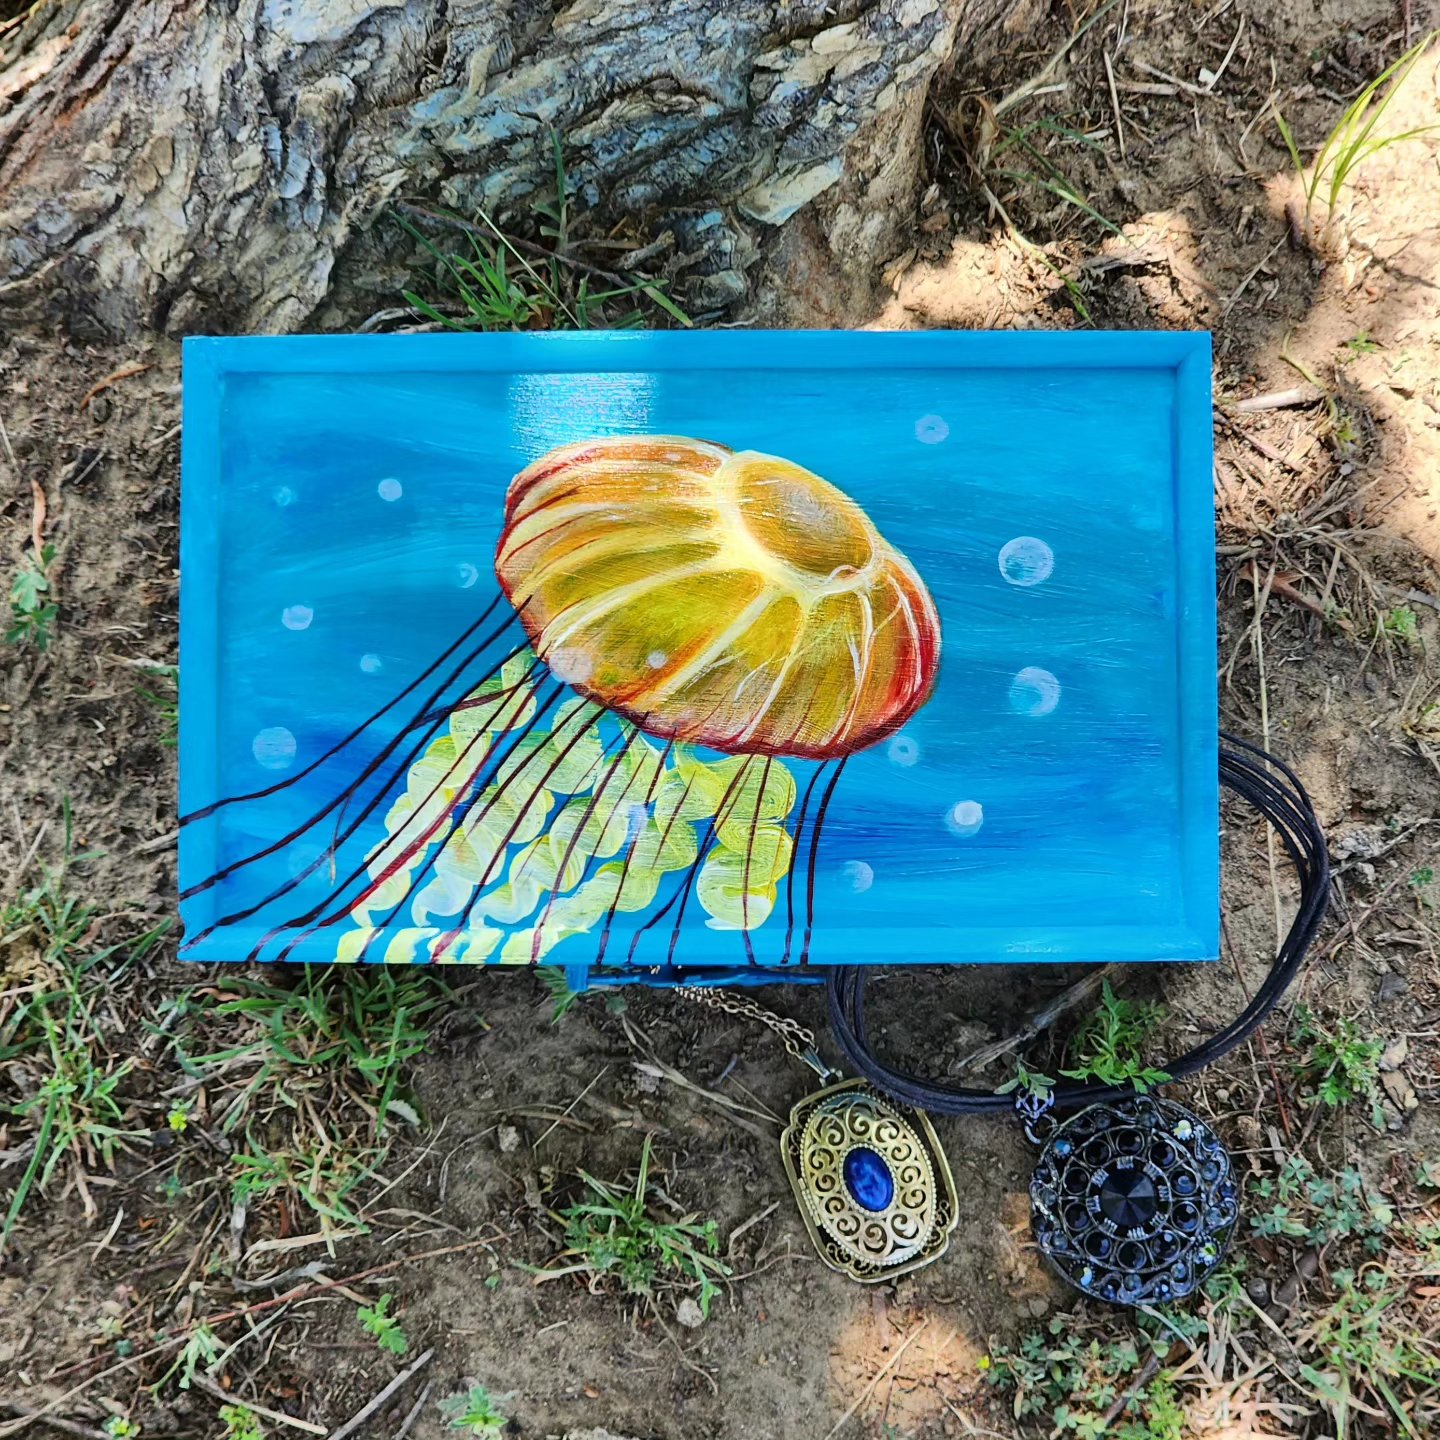 Beautiful handpainted wooden trinket box with a mirror. This cute trinket box is an ideal gift for a special loved one. You can store jewelry such as rings, necklaces, bracelets, or anything you would like to keep in a particular place, especially in this elegant and artistic trinket box.